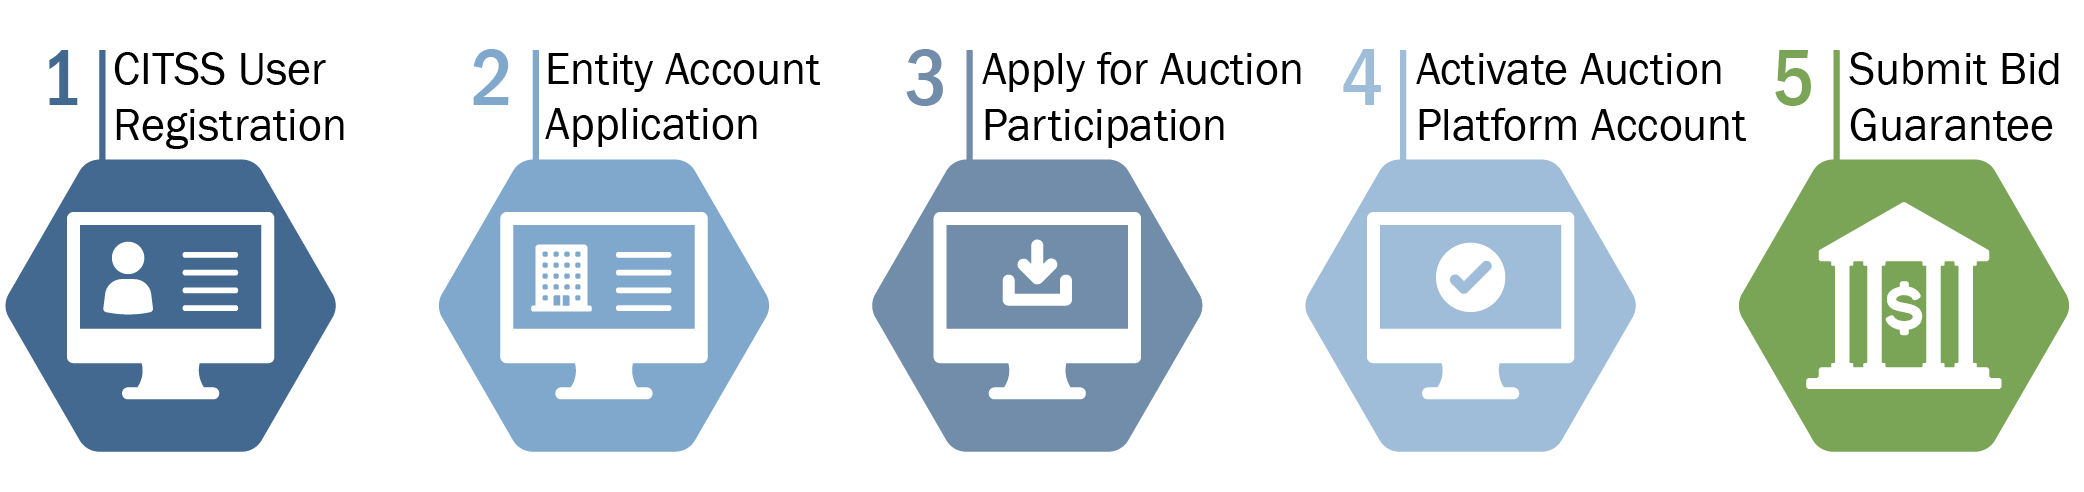 A graphic of five hexagons in blue and green with white icons representing the five steps of the CCA auctions registration process. Step 1 CITSS User Registration. Step 2 Entity Account Application. Step 3 Apply for Auction Participation. Step 4 Activate Auction Platform Account. Step 5 Submit Bid Guarantee.